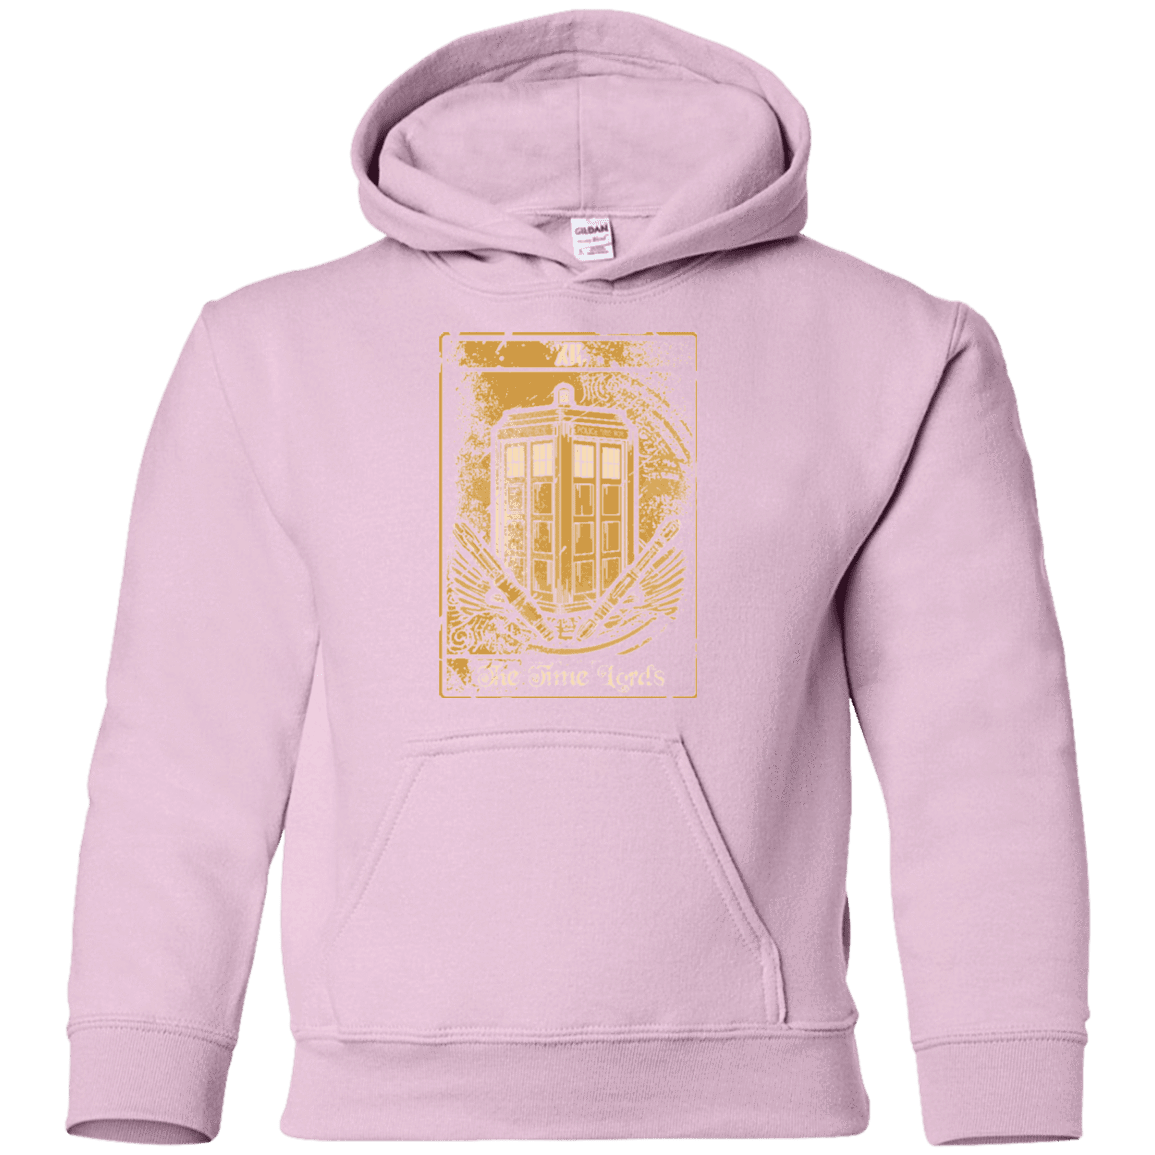 Sweatshirts Light Pink / YS THE TIMELORDS Youth Hoodie